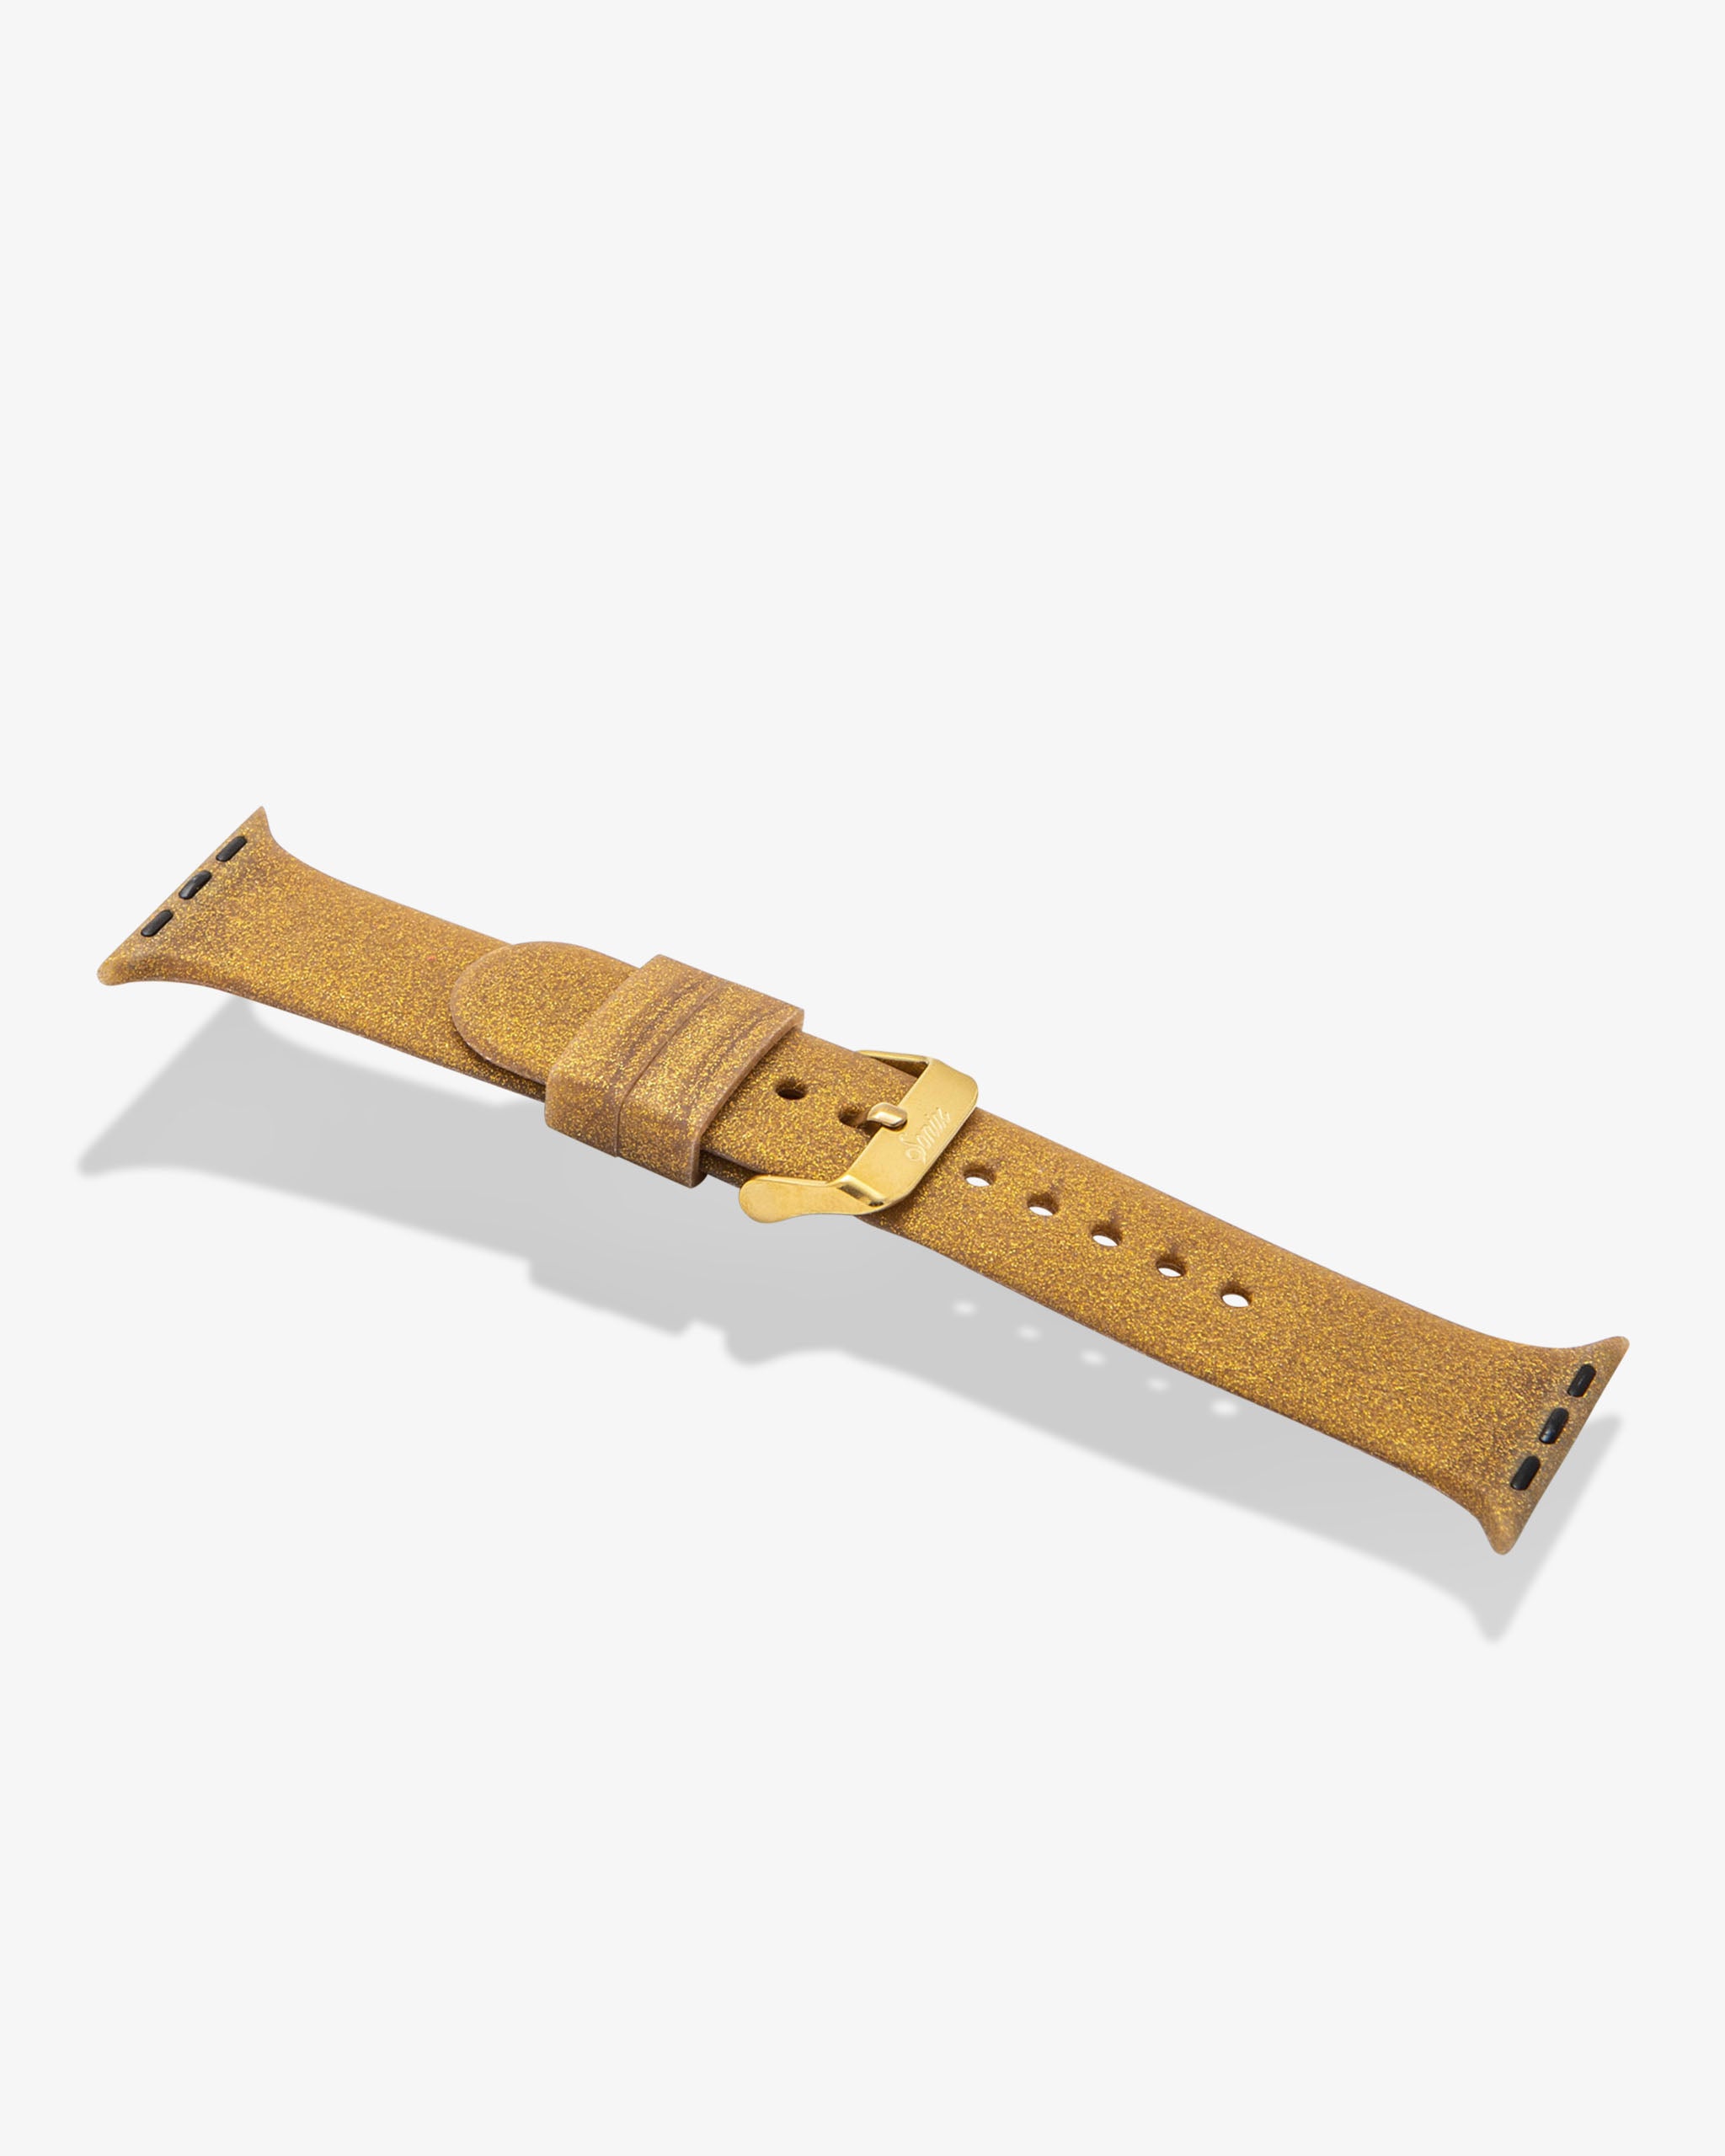 Silicone Apple Watch Band - Gold Glitter